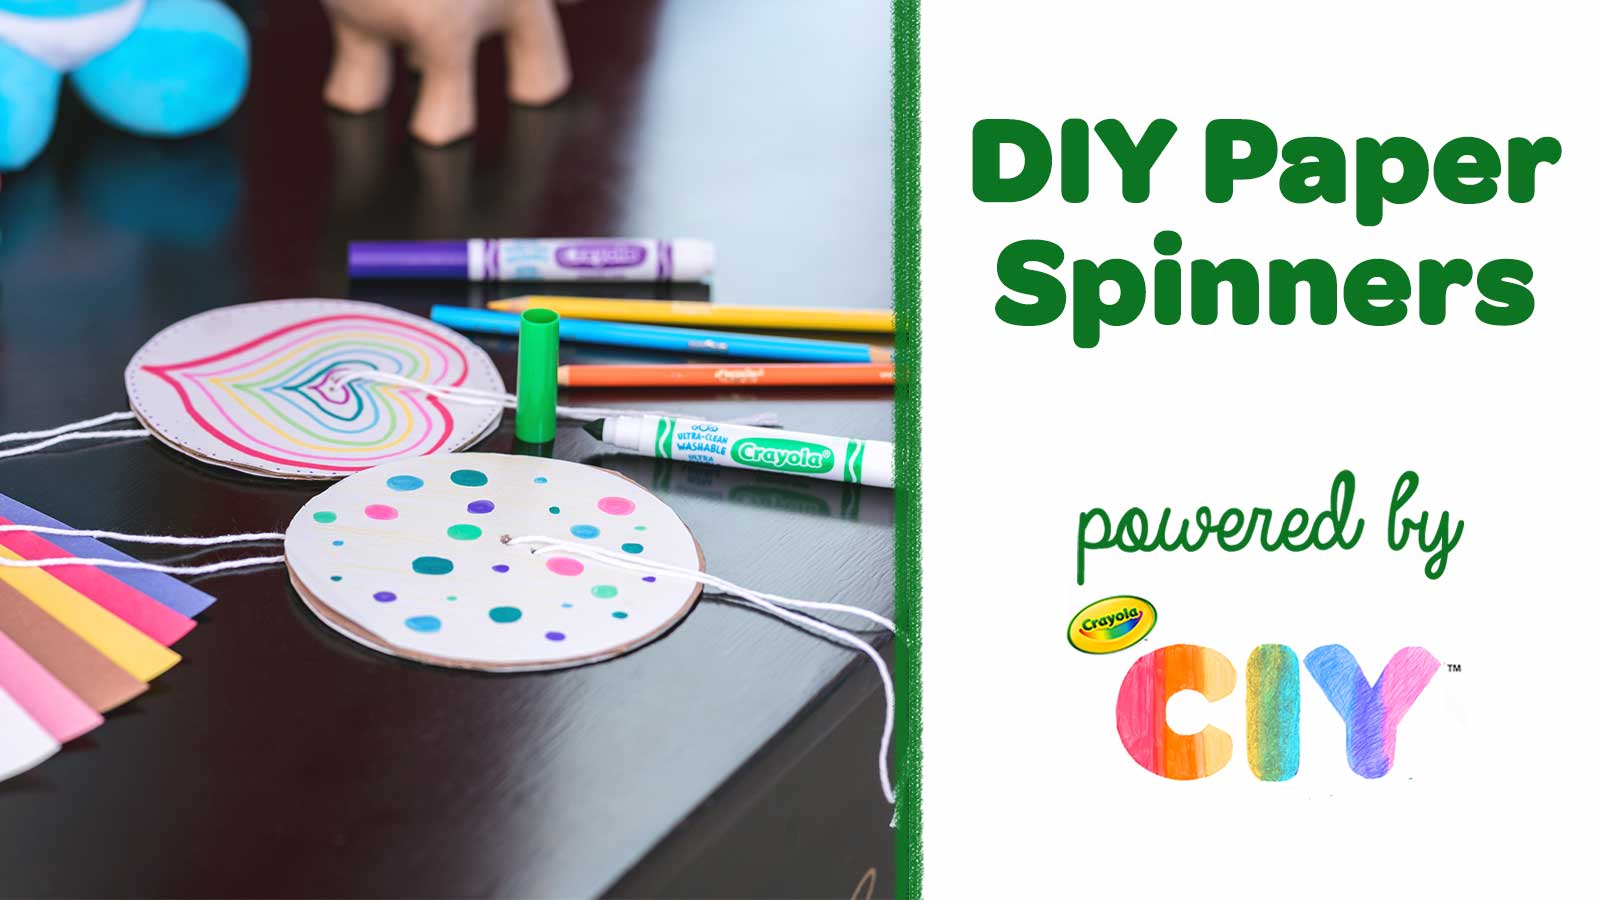 DIY Paper Spinners CIY Video Poster Frame